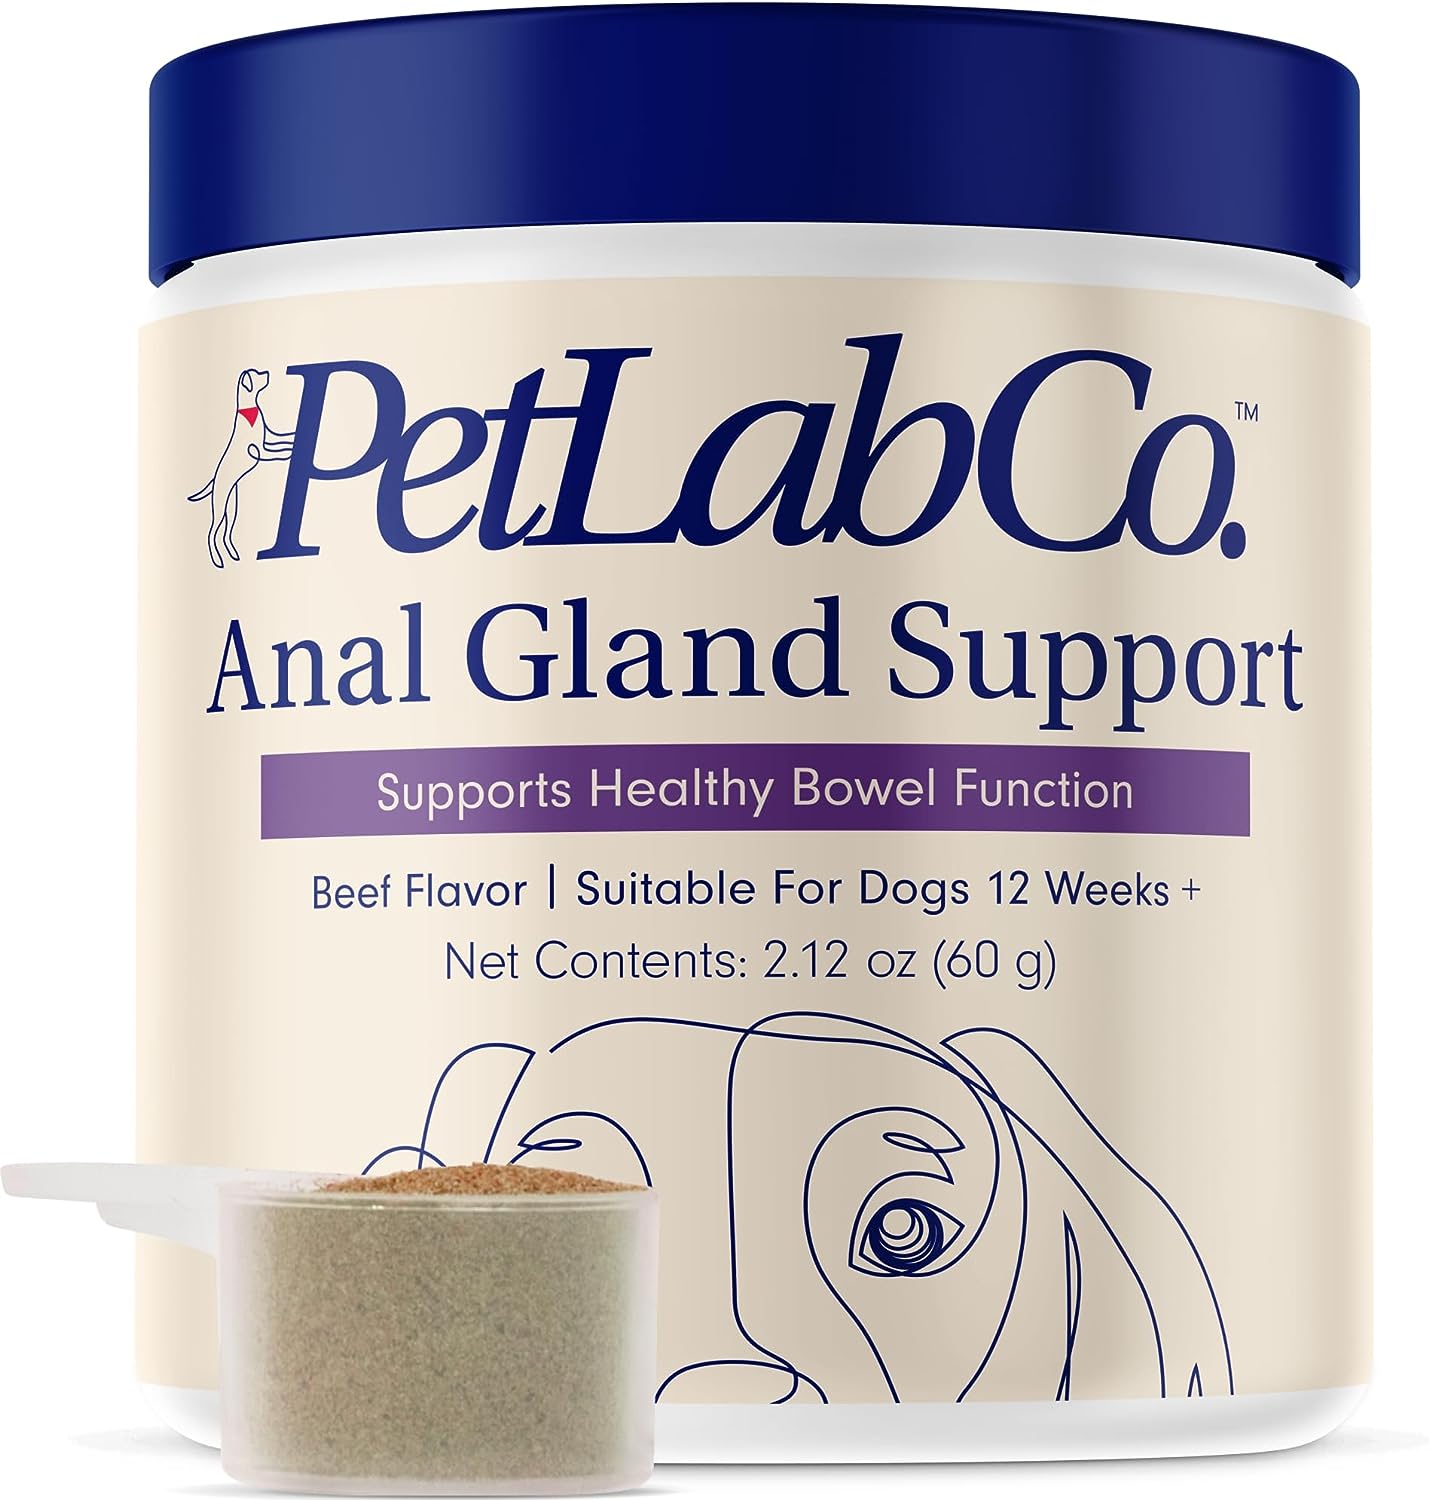 Petlab Co. Anal Gland Support